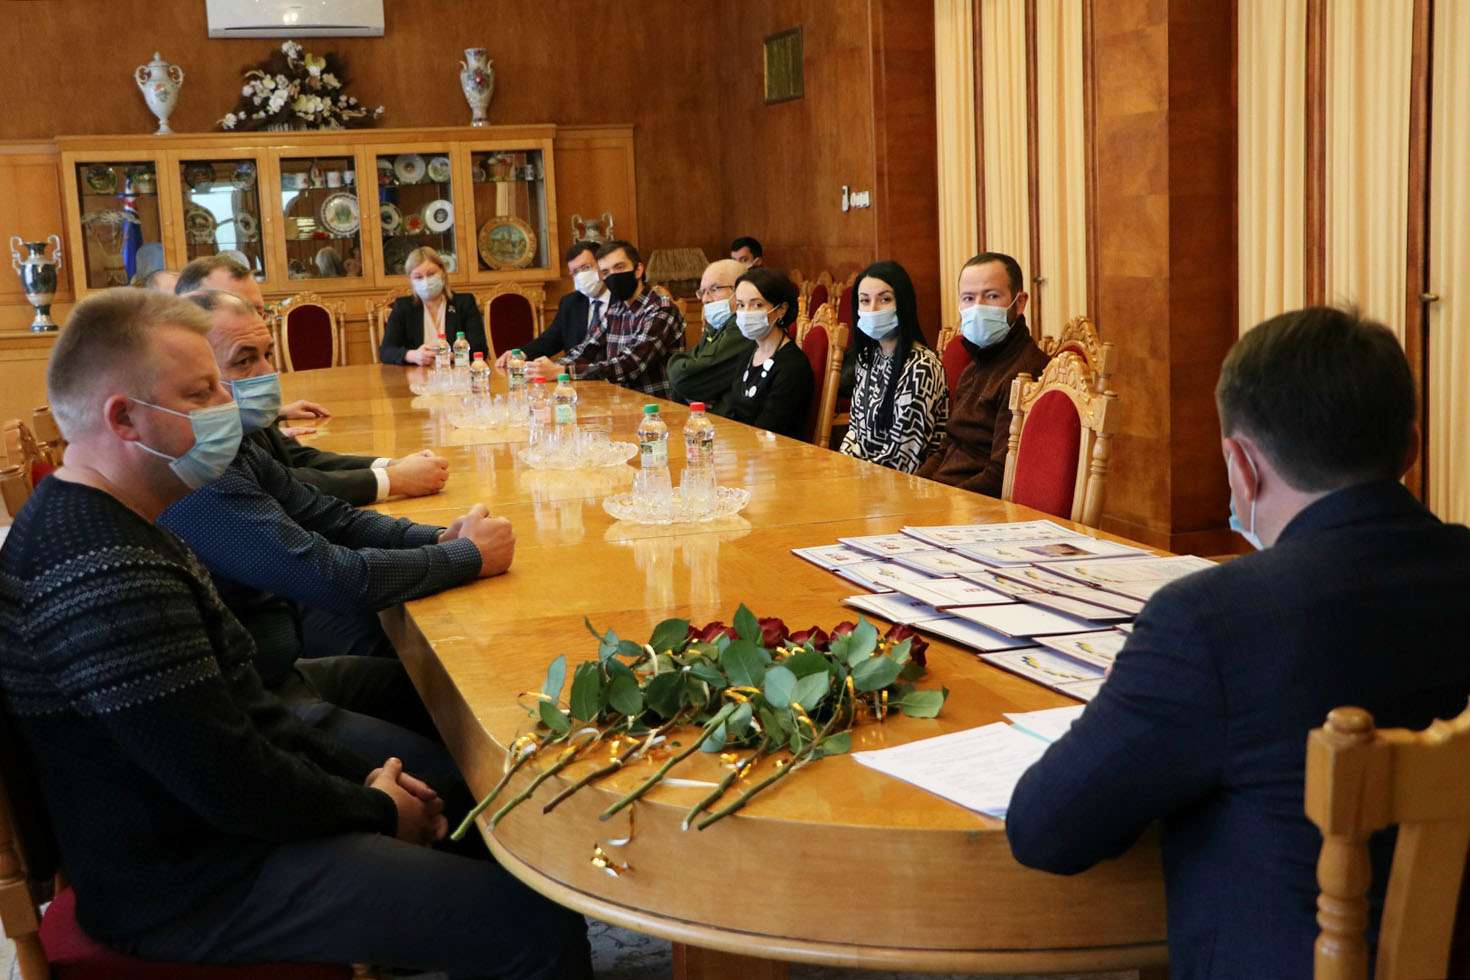 Volunteer Day! The authorities of Zakarpatska oblast commended the work of the Medical Aid Committee in Zakarpattia